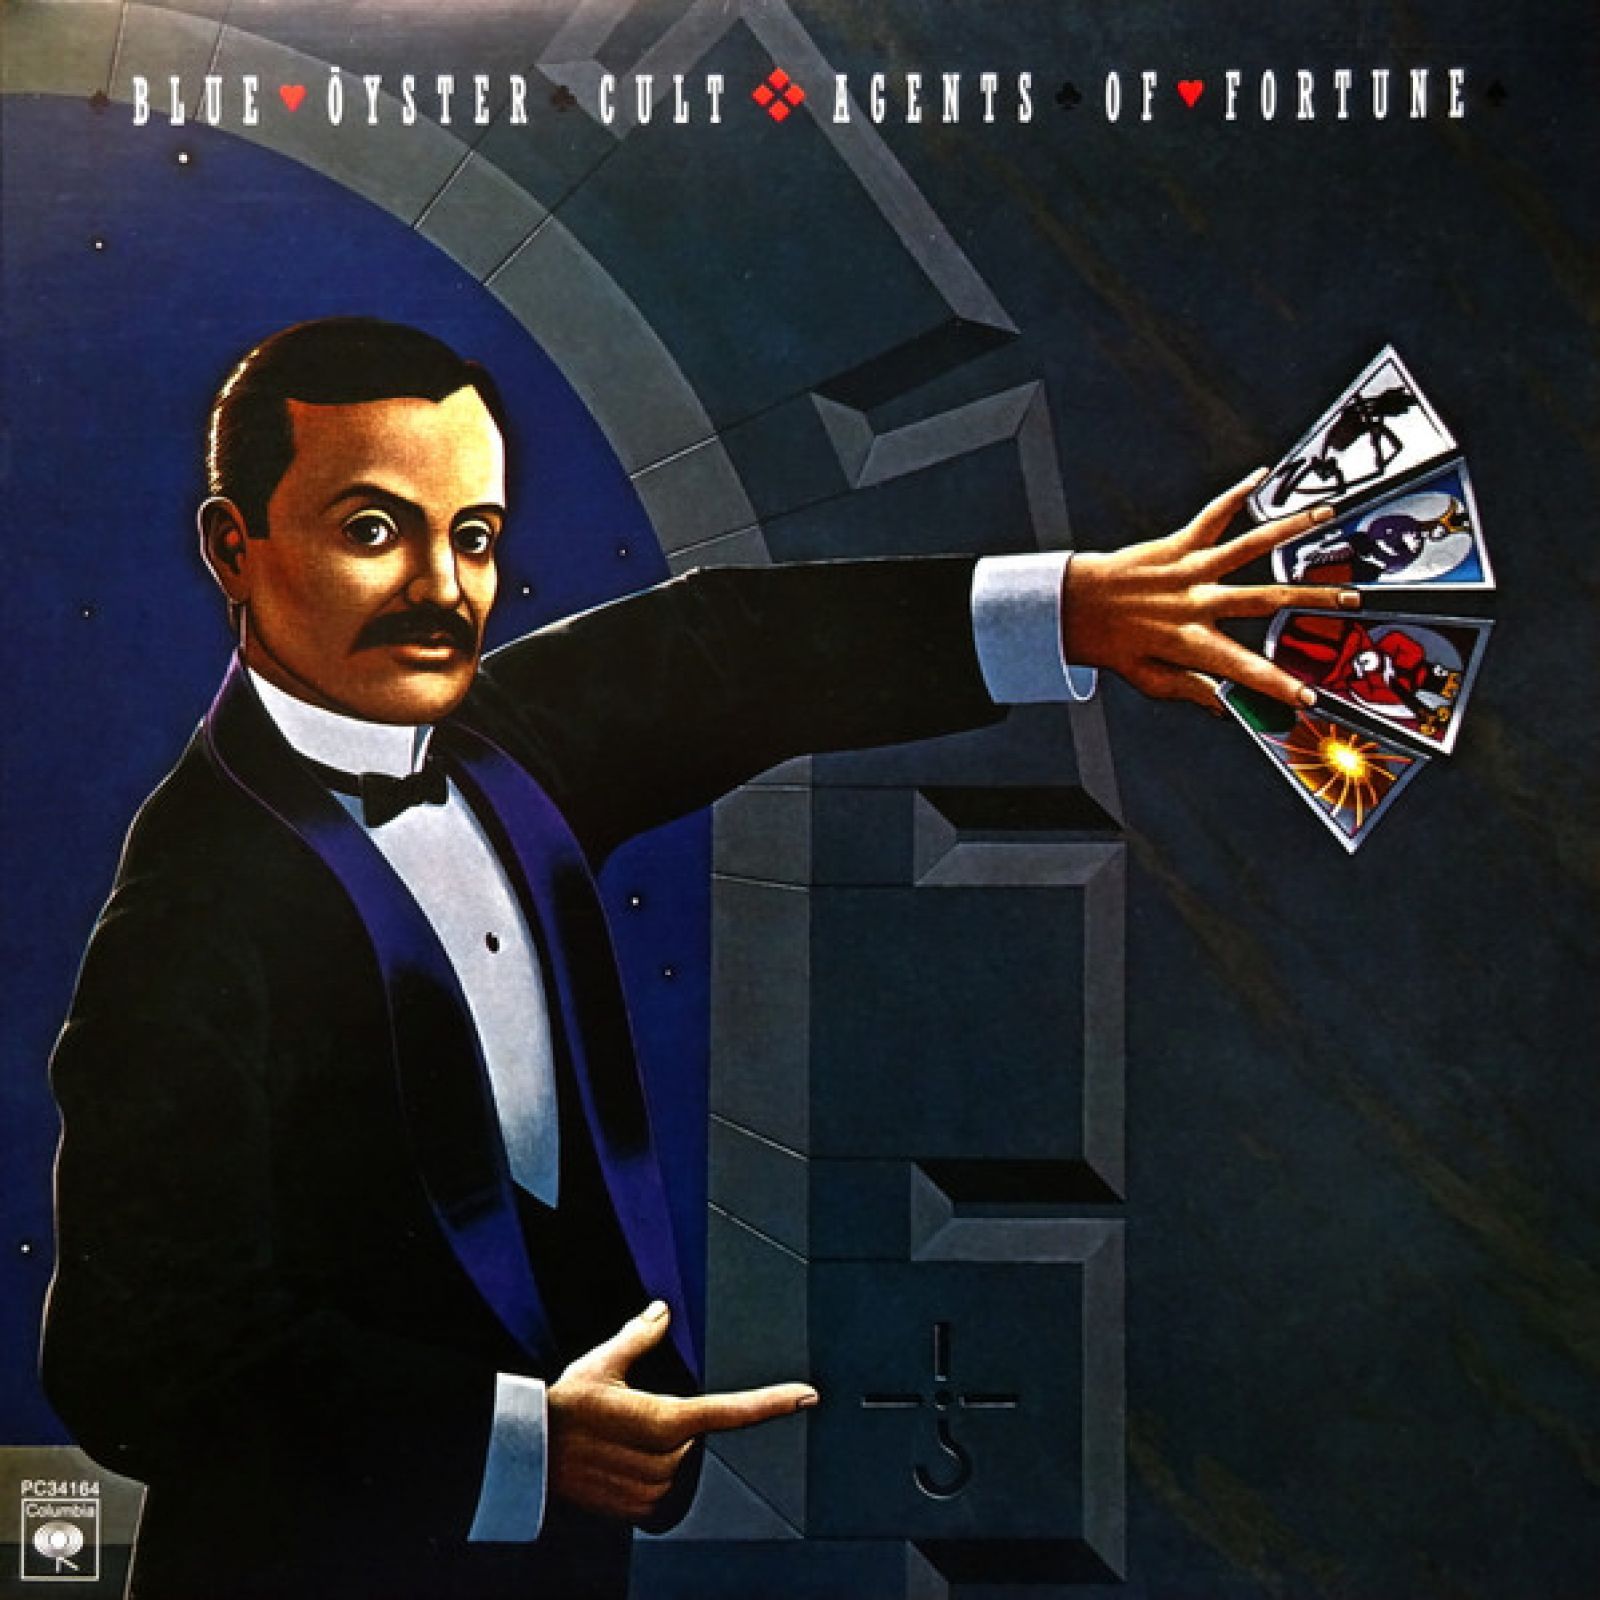 Виниловая пластинка Blue Oyster Cult, Agents Of Fortune (8718469535170) blue oyster cult виниловая пластинка blue oyster cult tyranny and mutation